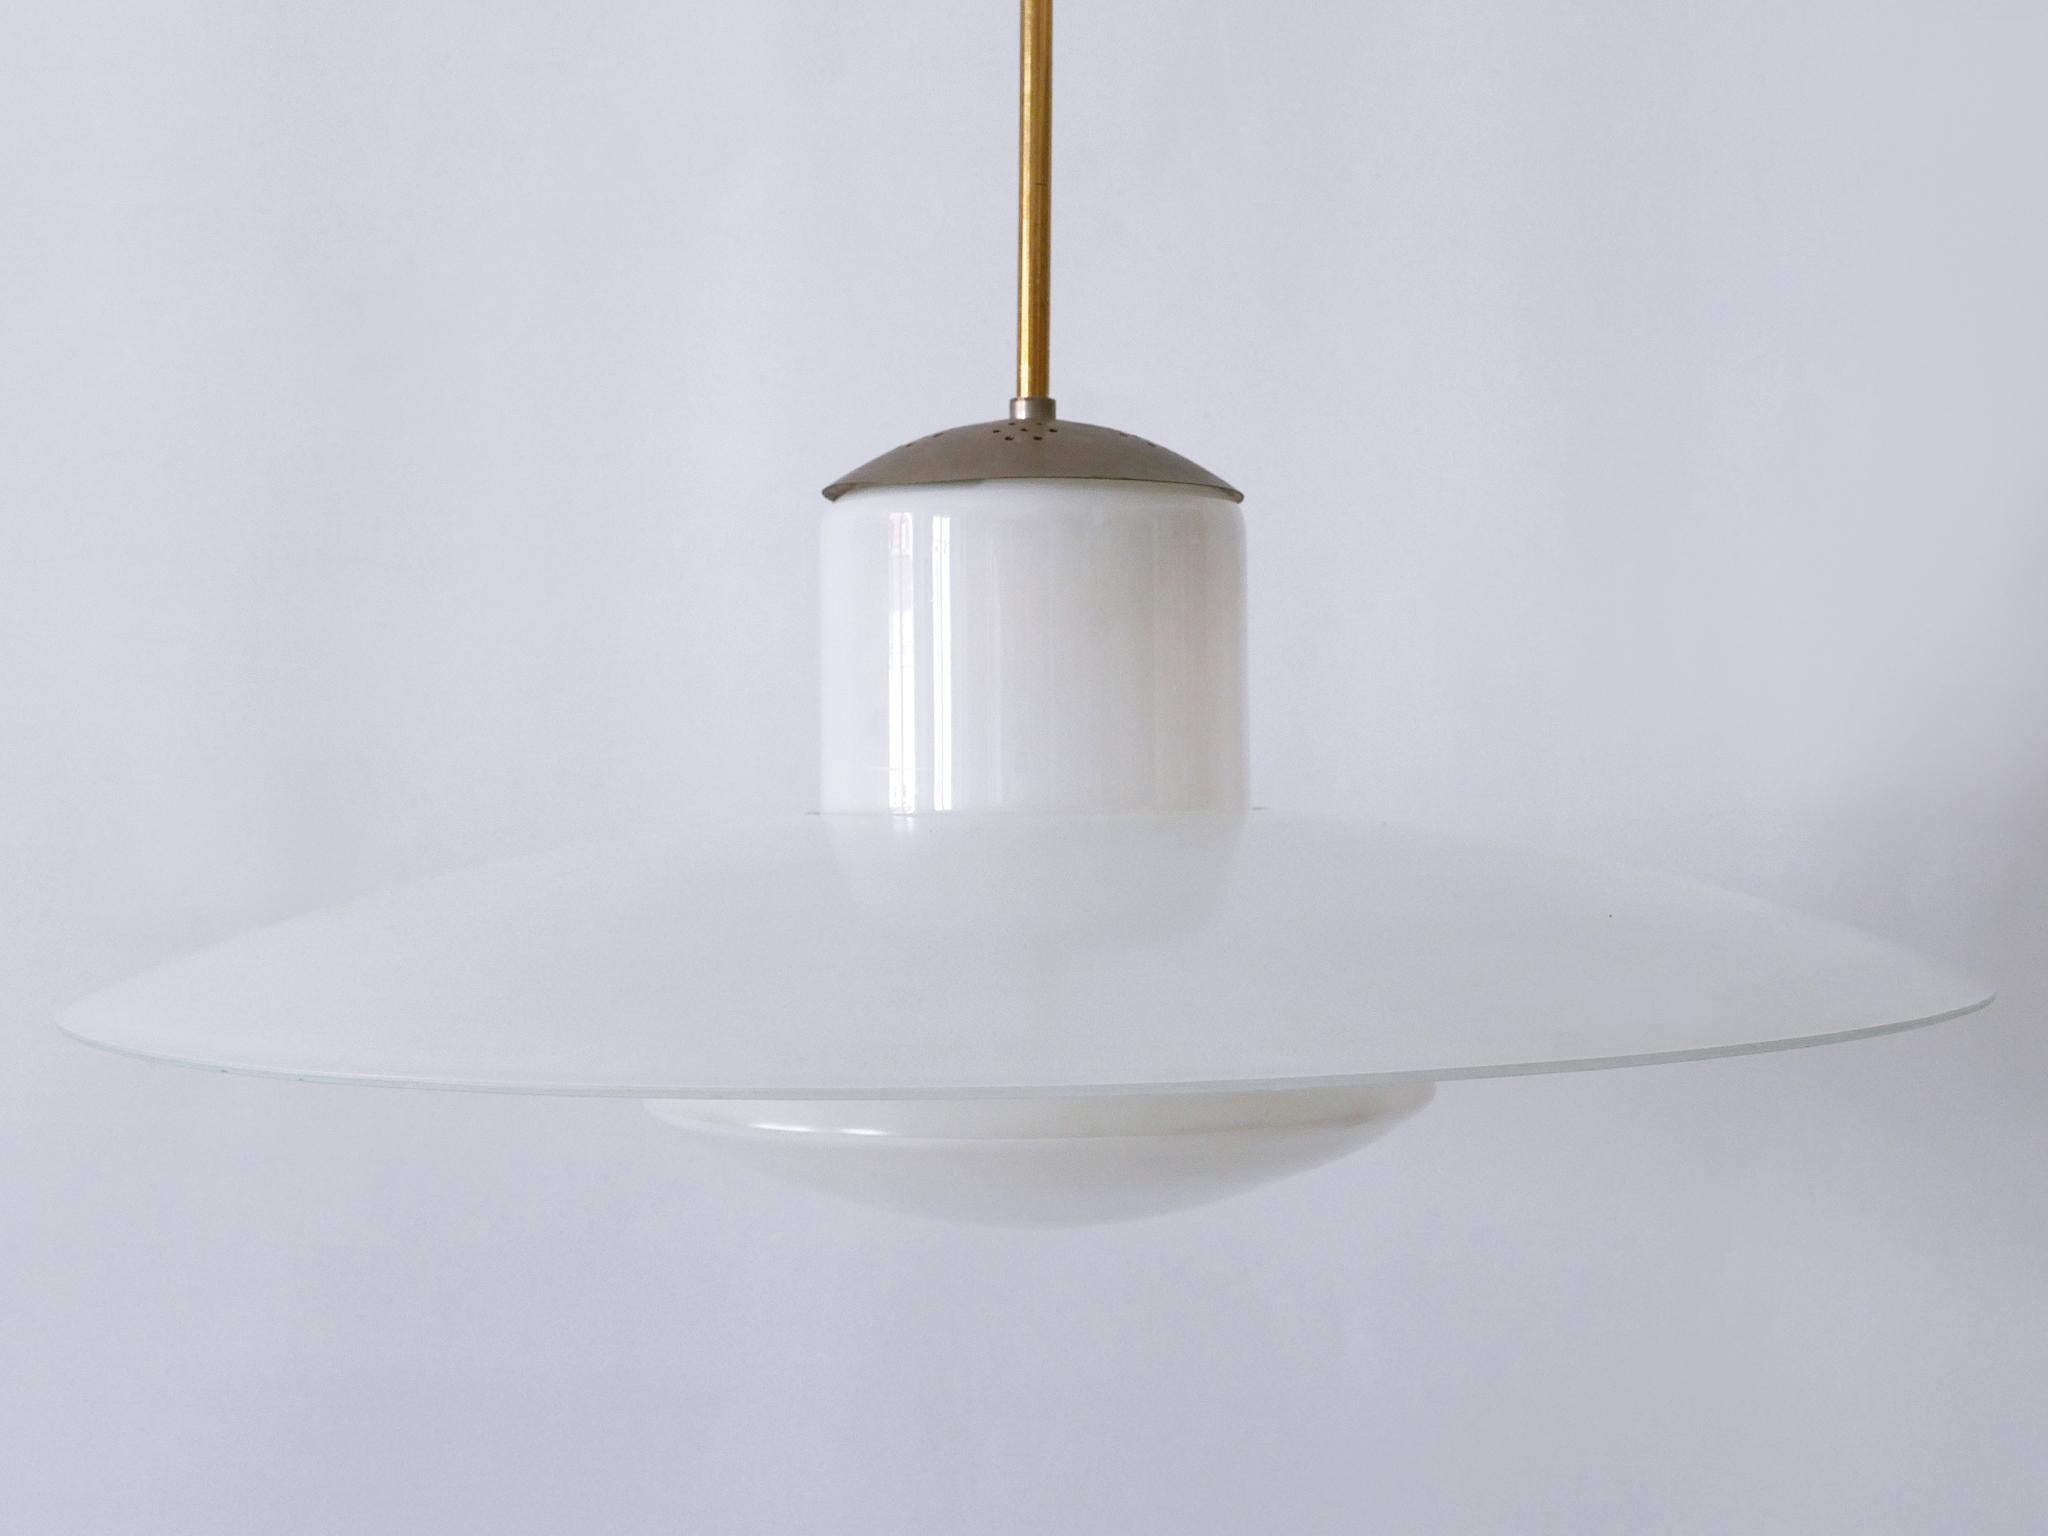 Rare Mid-Century Modern Pendant Lamp by Wolfgang Tümpel for Doria Germany 1950s For Sale 8